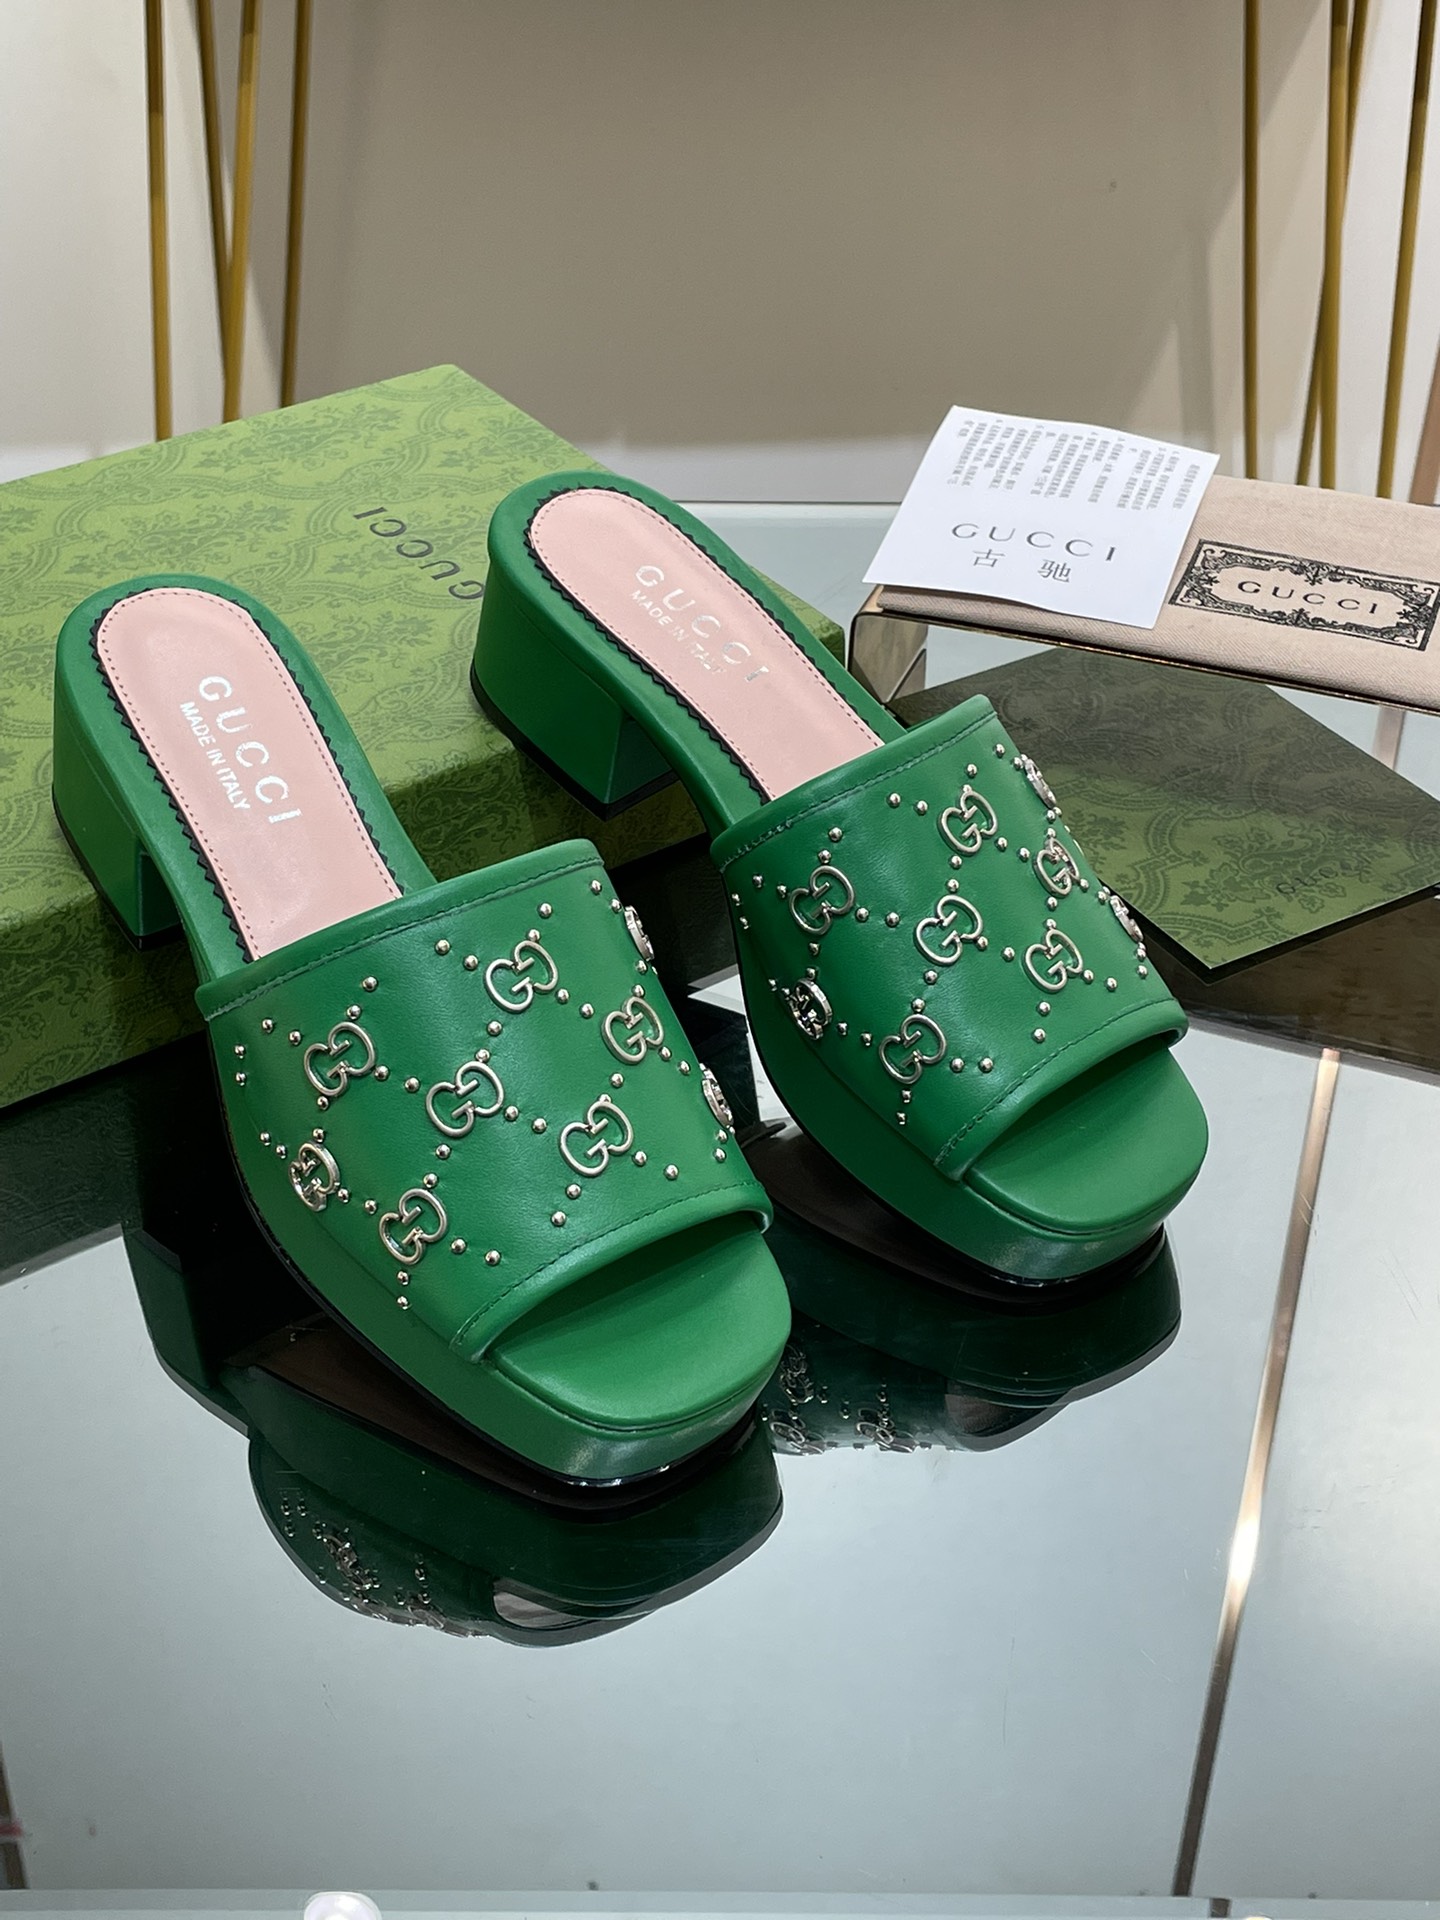 Online China
 Gucci Shoes Sandals Green Genuine Leather Sheepskin Spring Collection Fashion